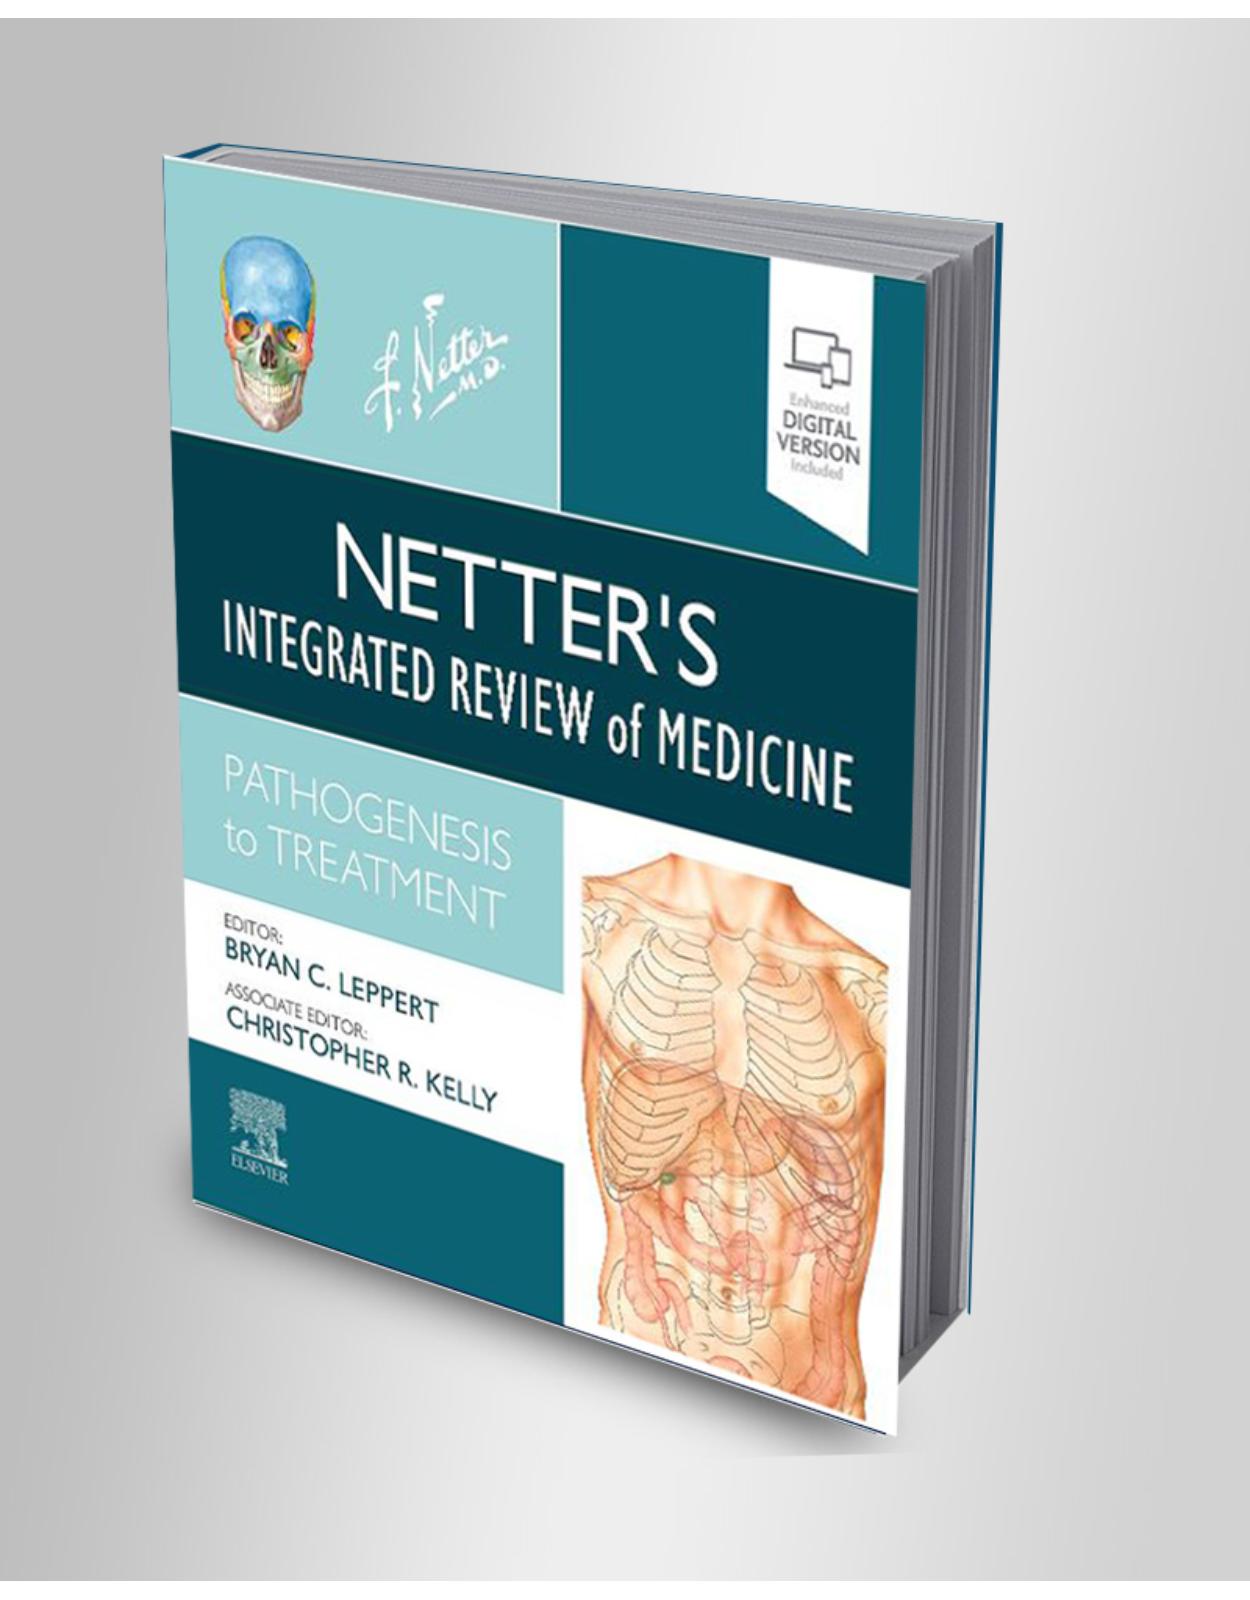 Netter's Integrated Review of Medicine: Pathogenesis to Treatment (Netter Clinical Science)